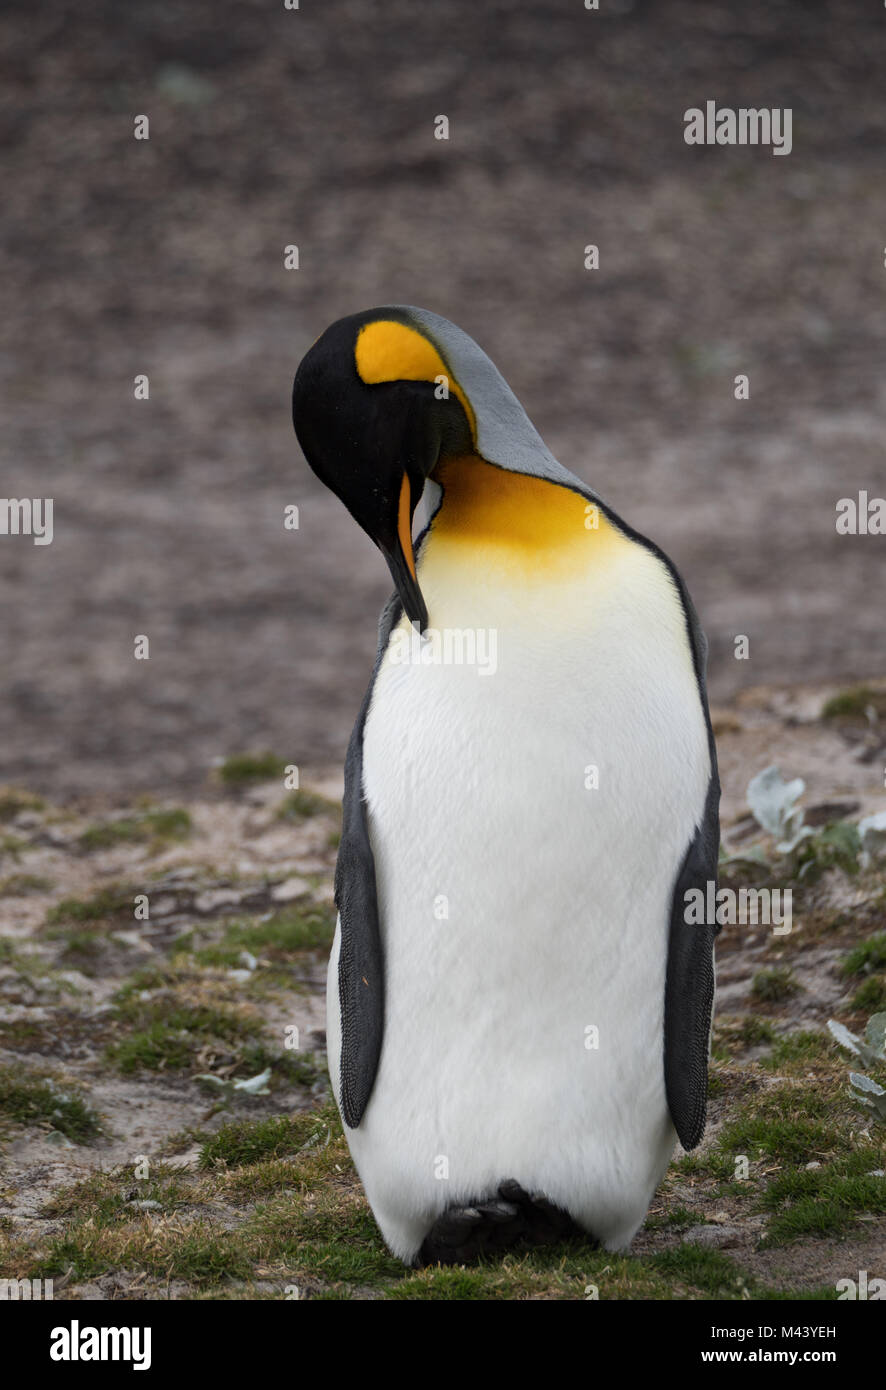 A king penguin resting with its head tucked to its chest leaning back on its heels and tail. Shallow depth of field. Stock Photo